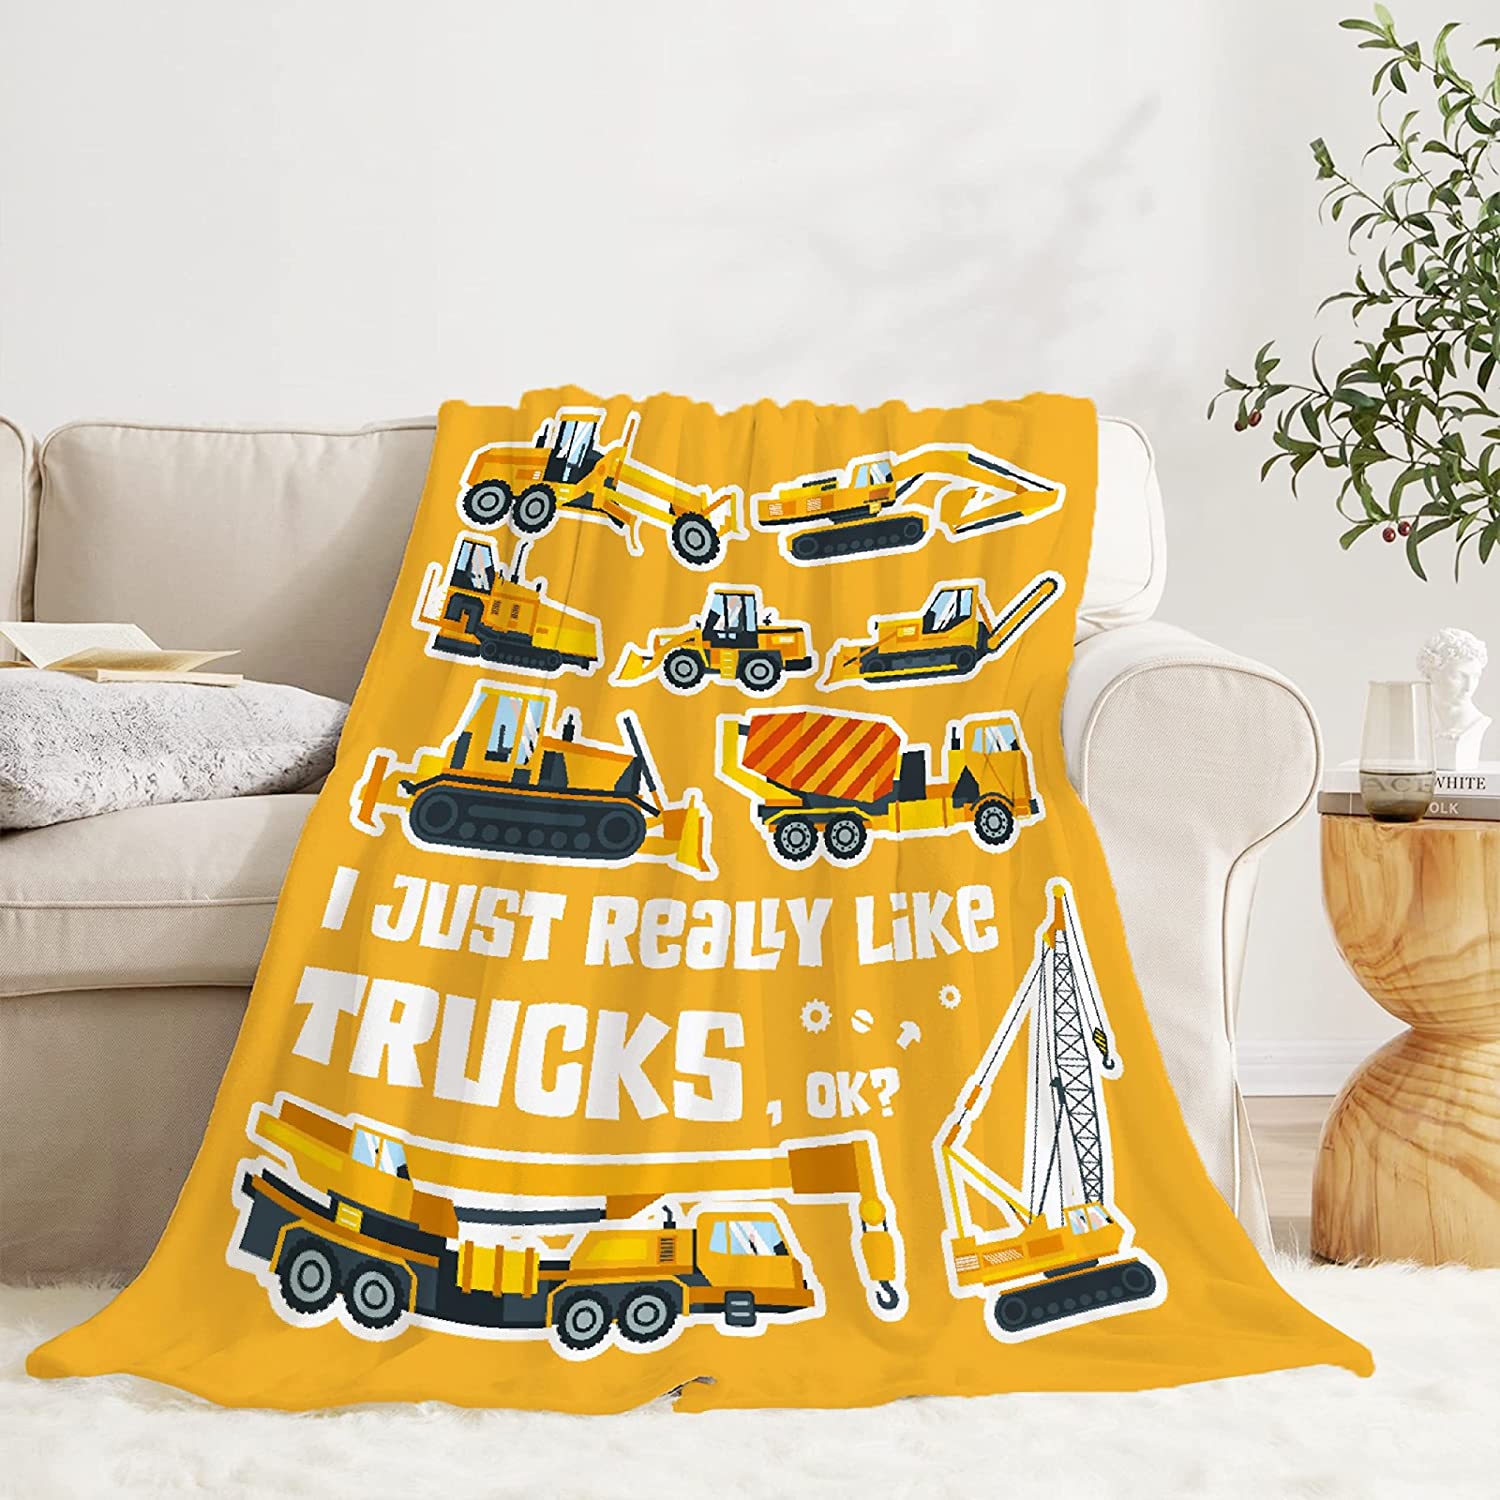 Trucks Blanket, I Just Really Like Trucks, Ok? Throw Blanket for Girls Boys Gifts, Ultral Soft Cozy Warm Flannel Fleece Suit for Sofa, Couch, Bed, Travel, Sofa 80"x60" L Blanket for Adults - image 4 of 6